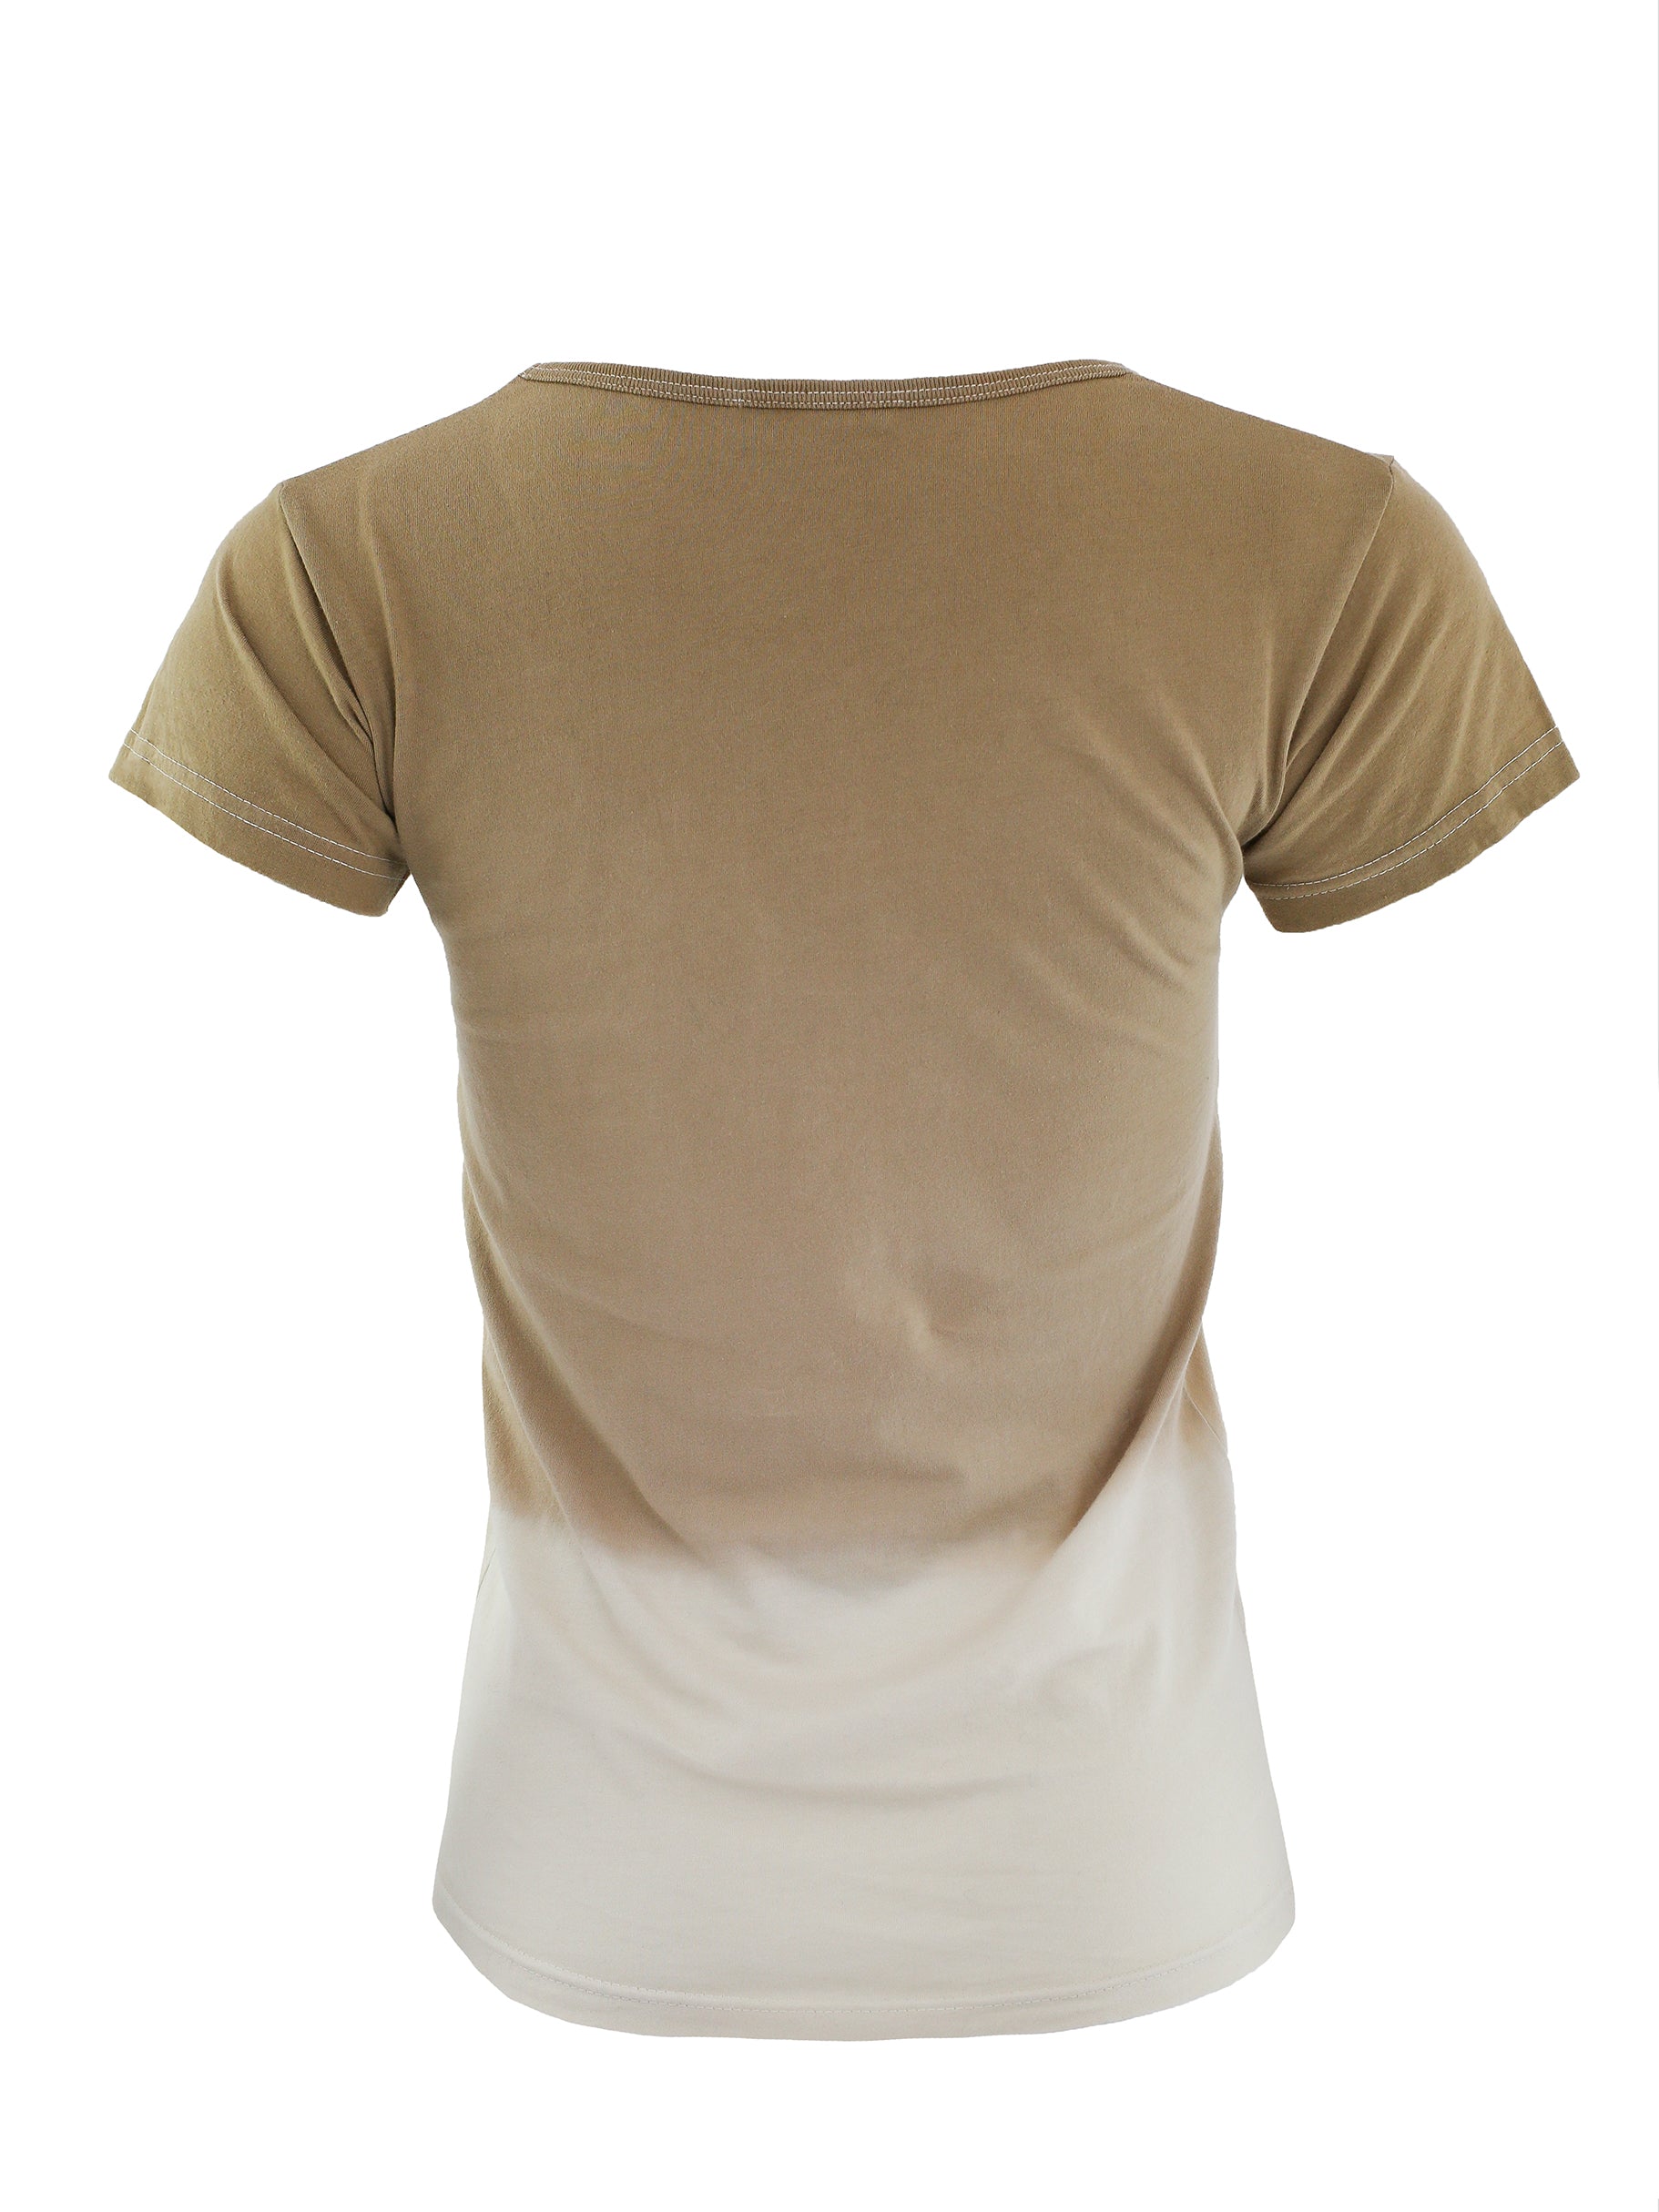 BROWN AND WHITE OMBRE T-SHIRT